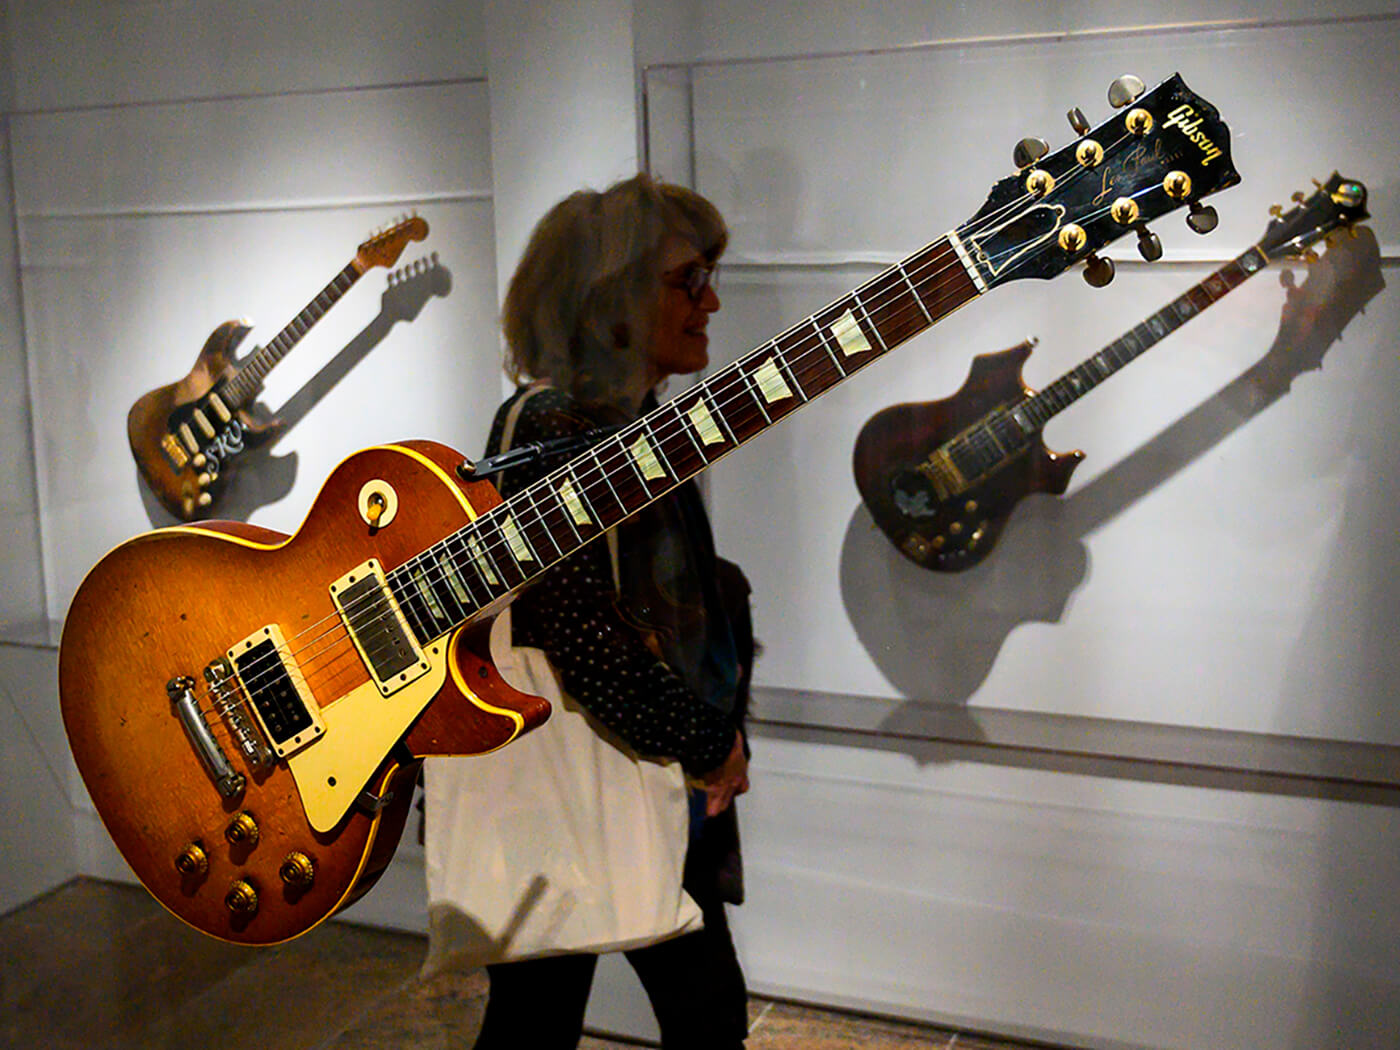 "Number One" belonging to Jimmy Page displayed at an exhibition called "Play It Loud: Instruments of Rock and Roll" at the Met